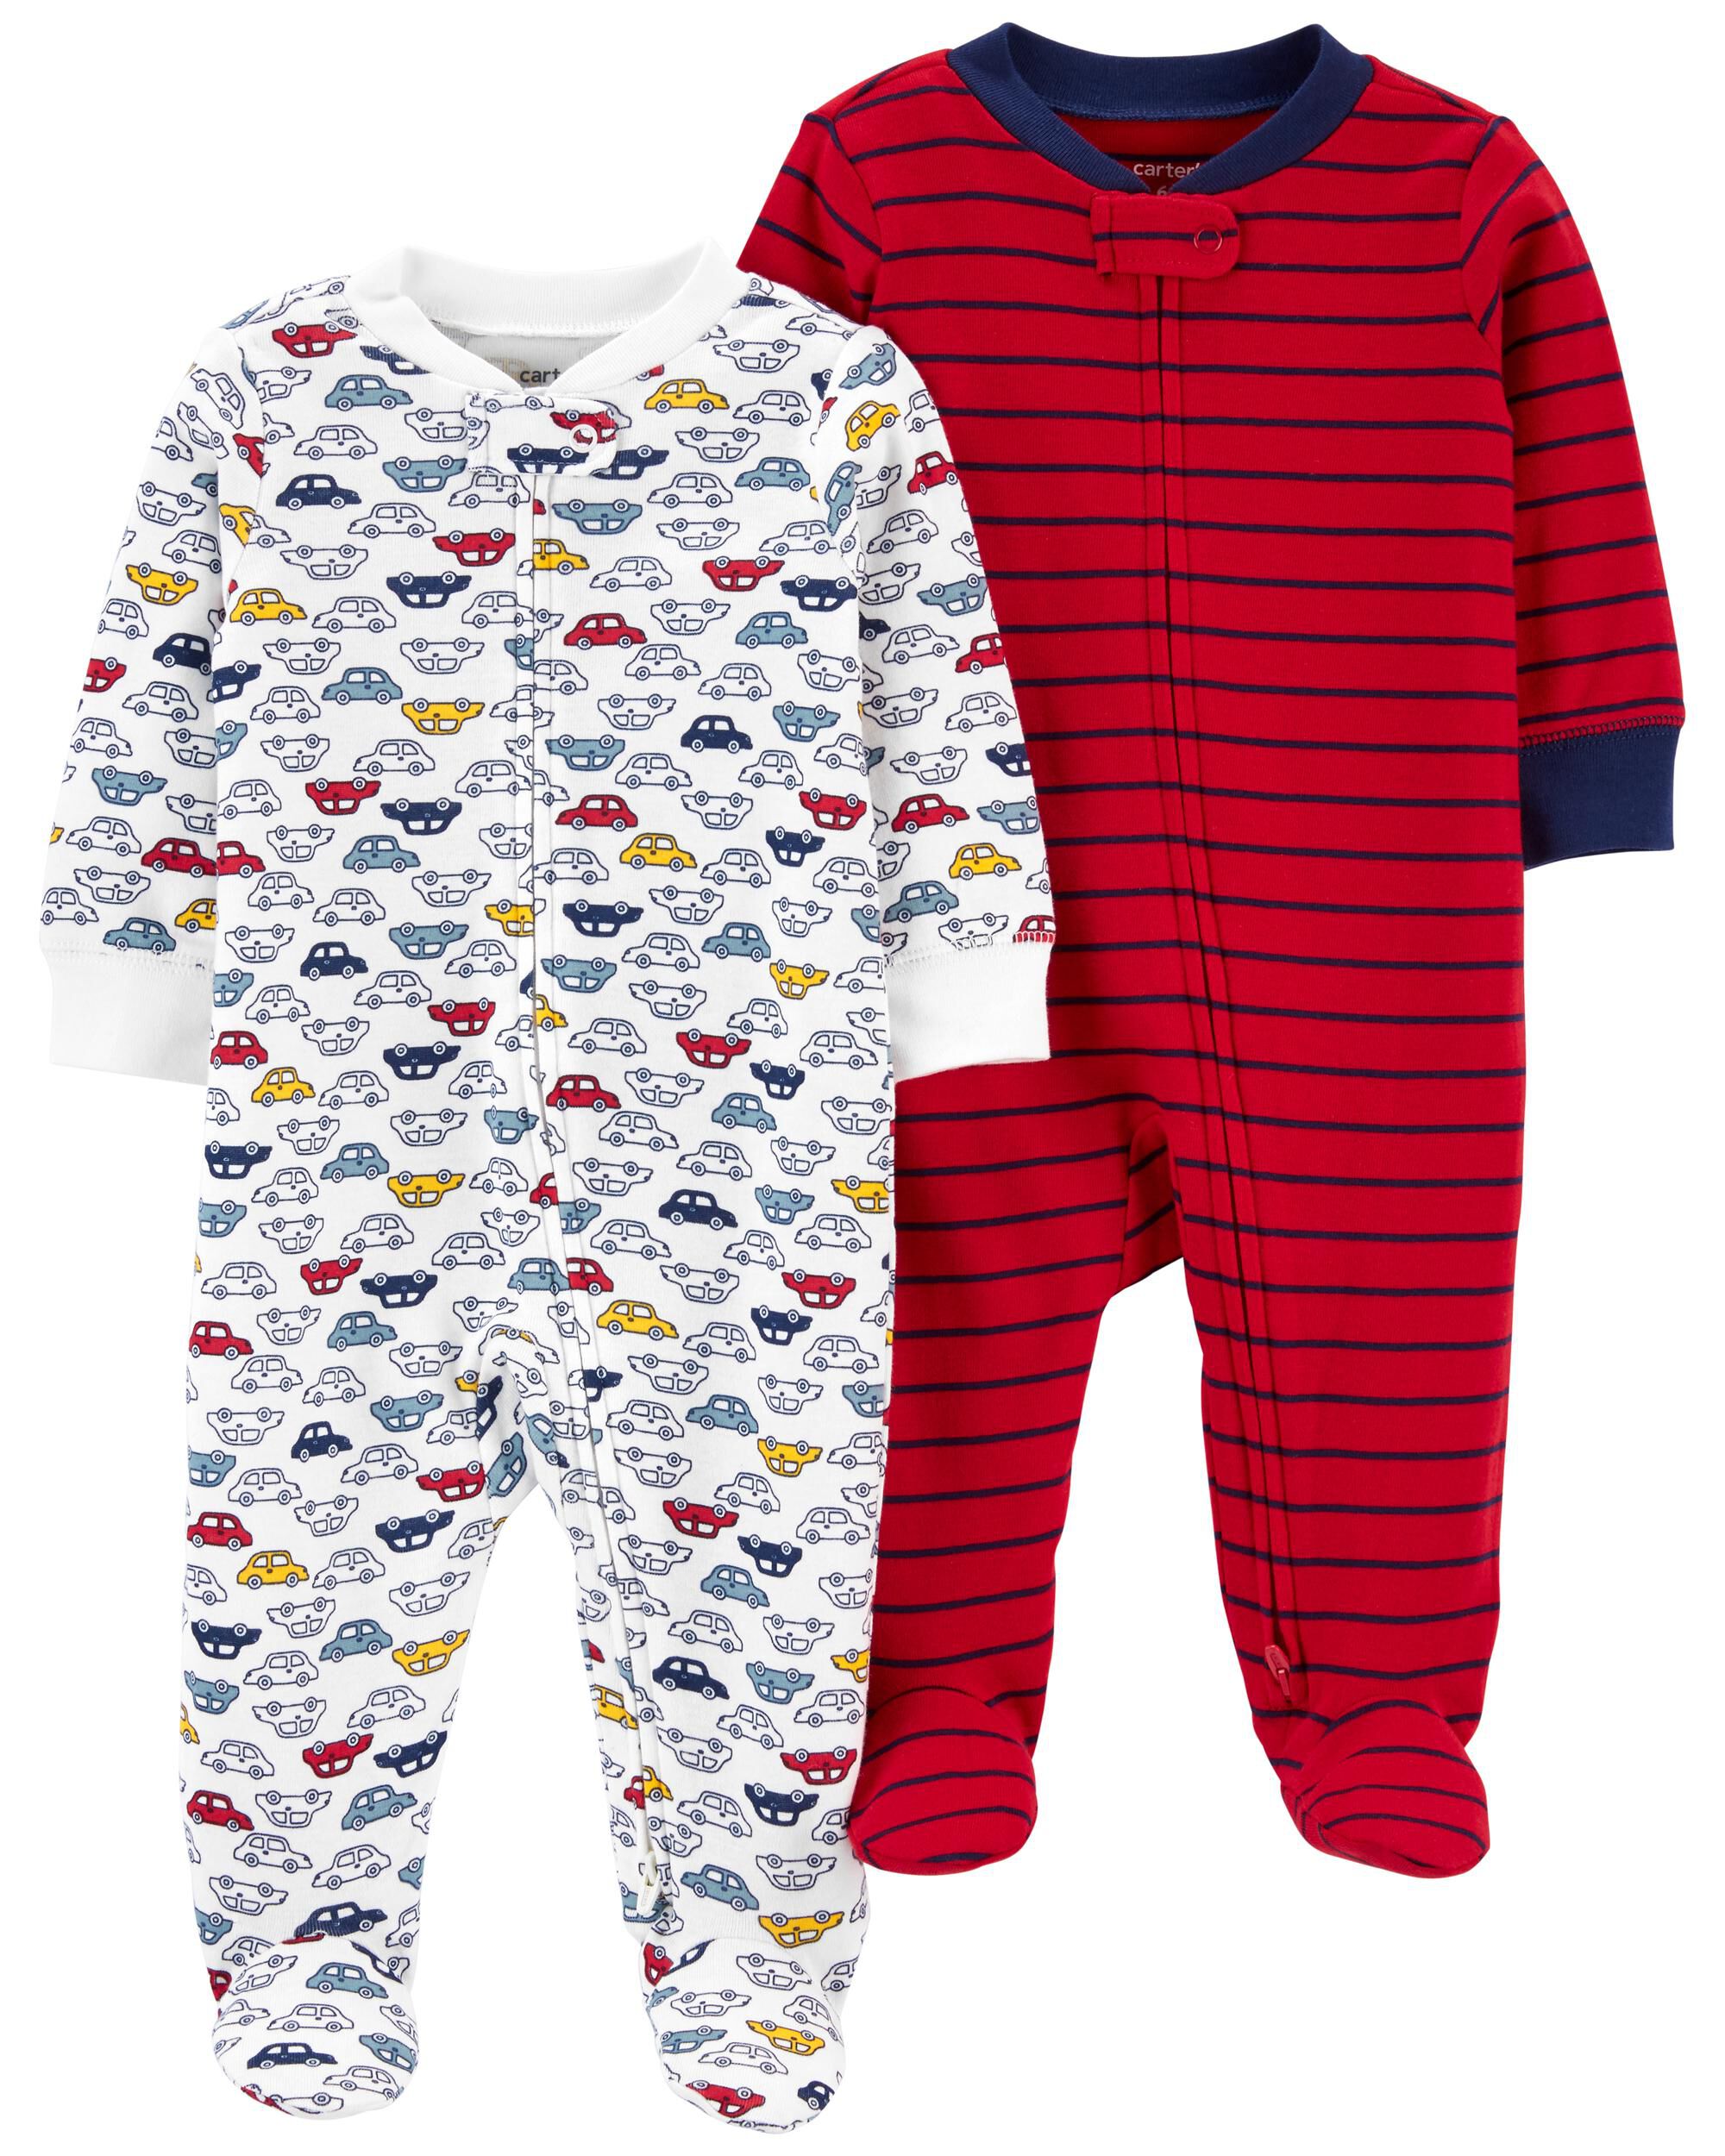  *CLEARANCE* 2-Pack Cotton Zip-Up Sleep & Plays 